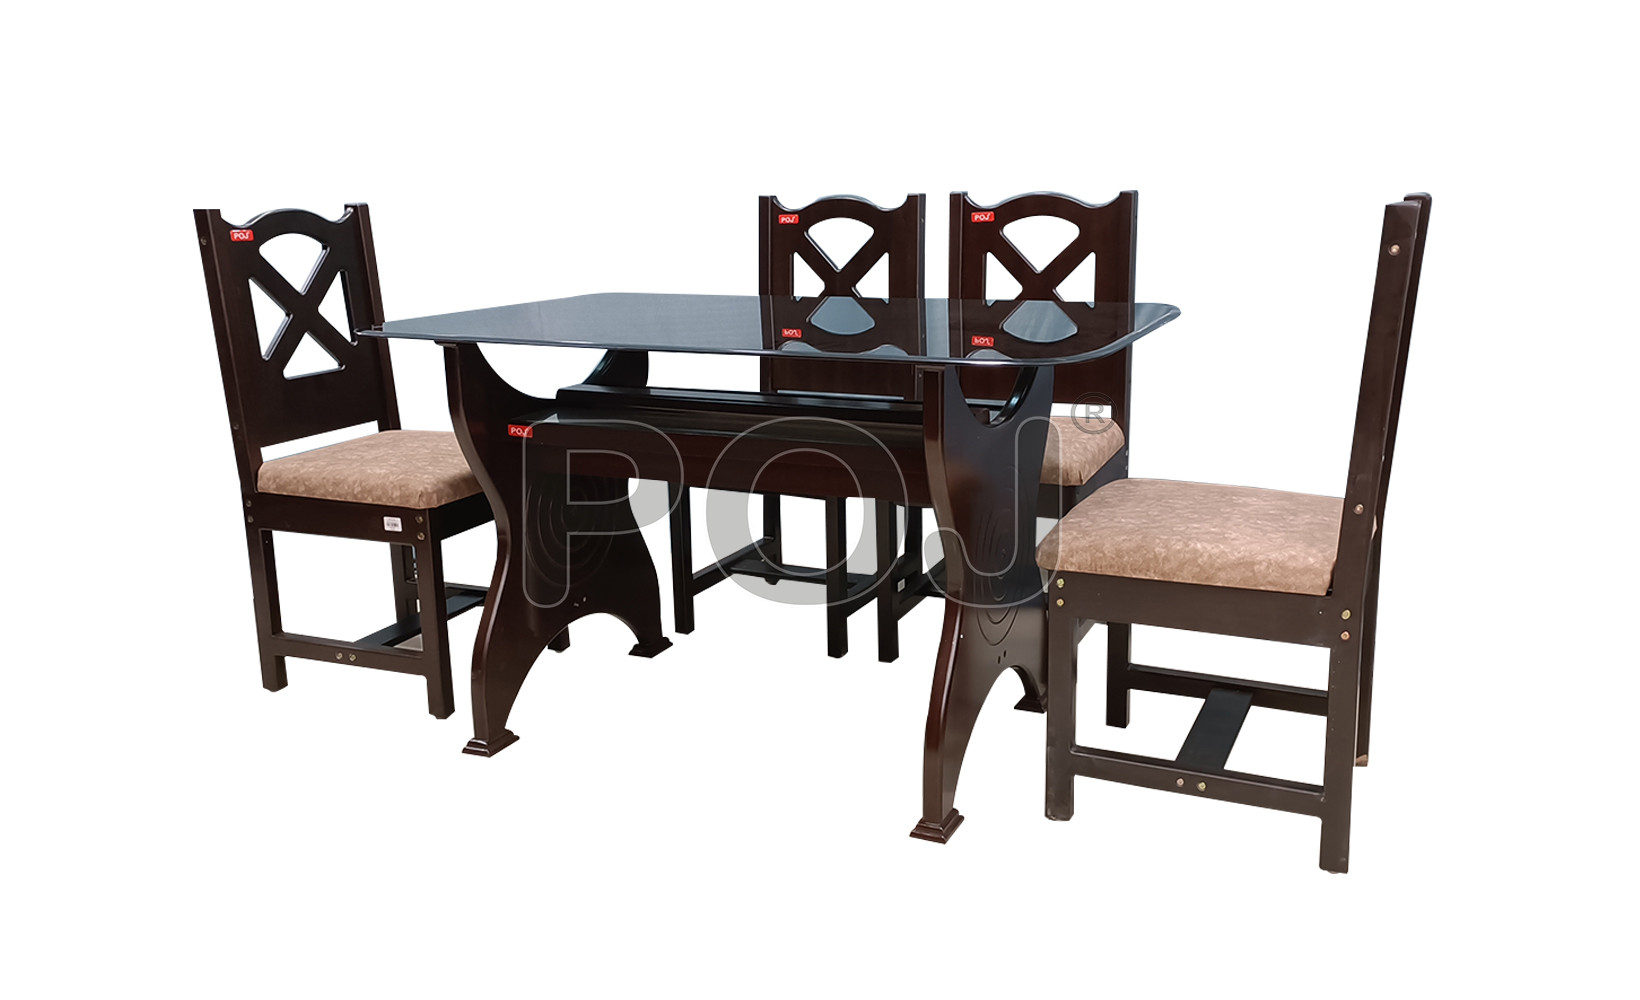 Miso 4 Seater Dining Table With Glass On Top